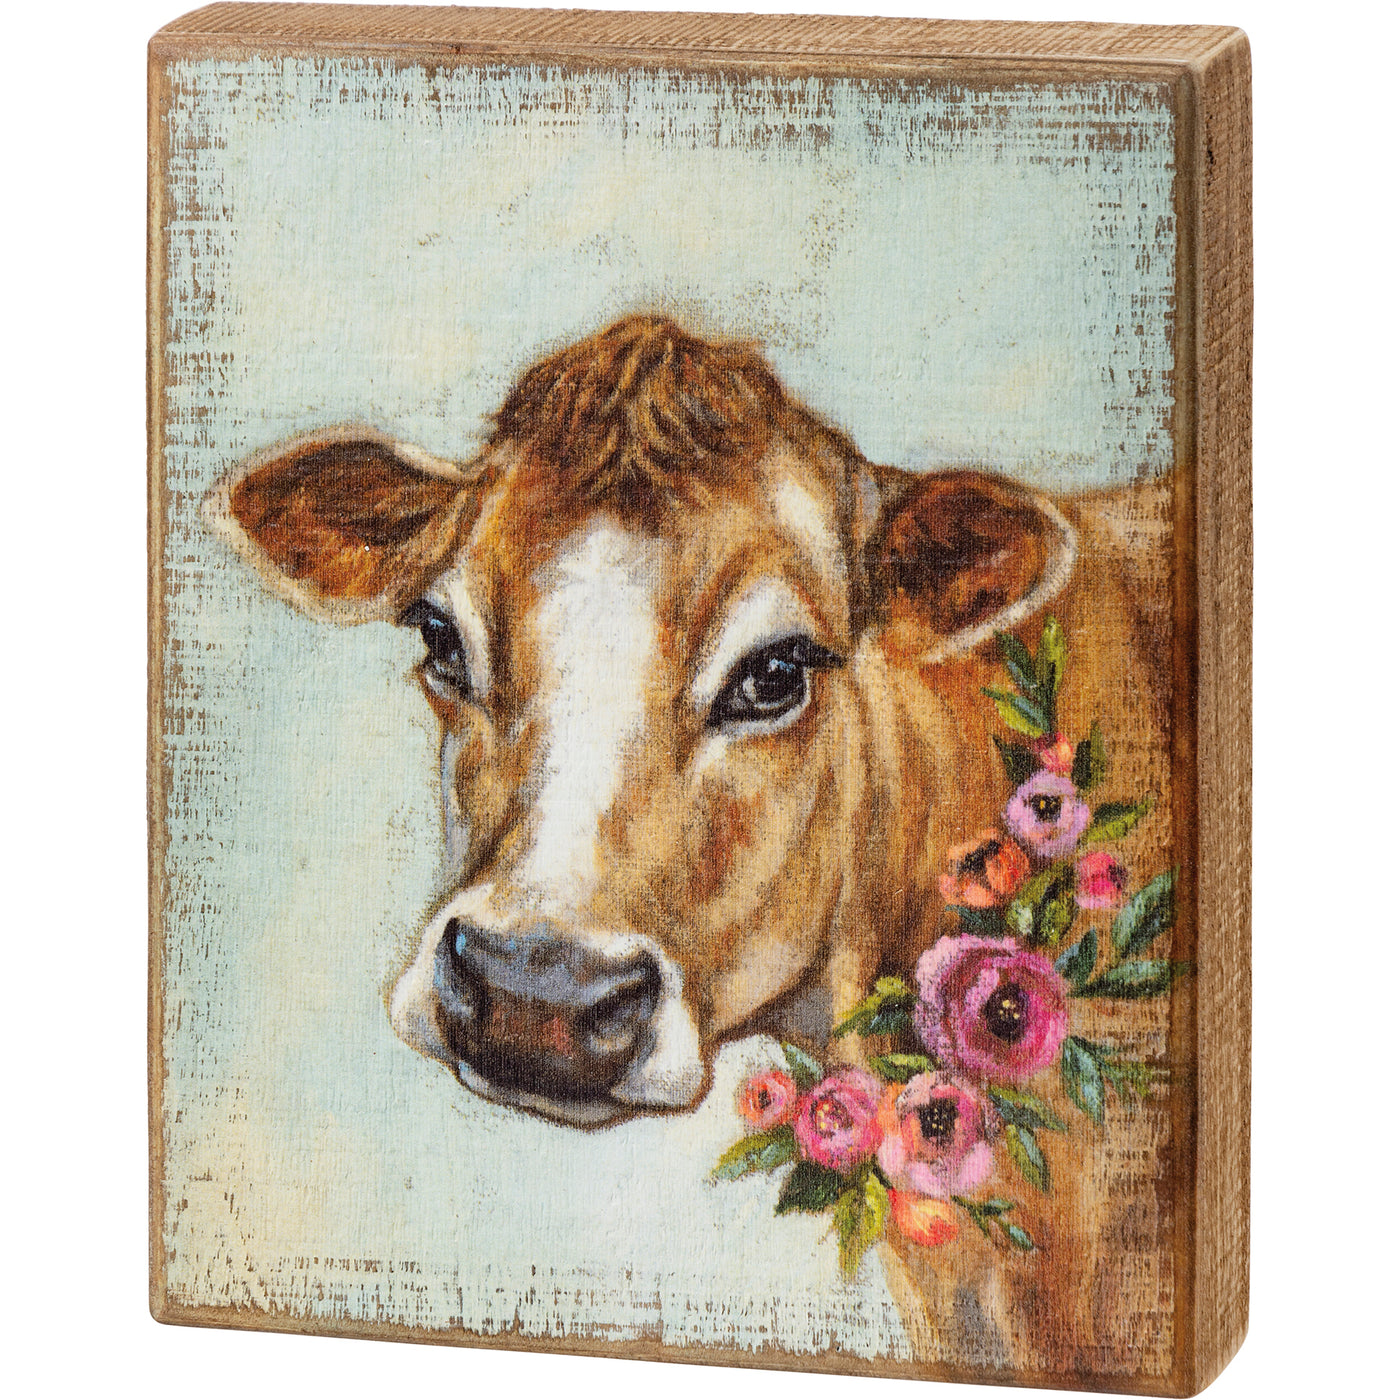 Surprise Me Sale 🤭 Sweet Brown Cow with Floral Wreath Box Sign